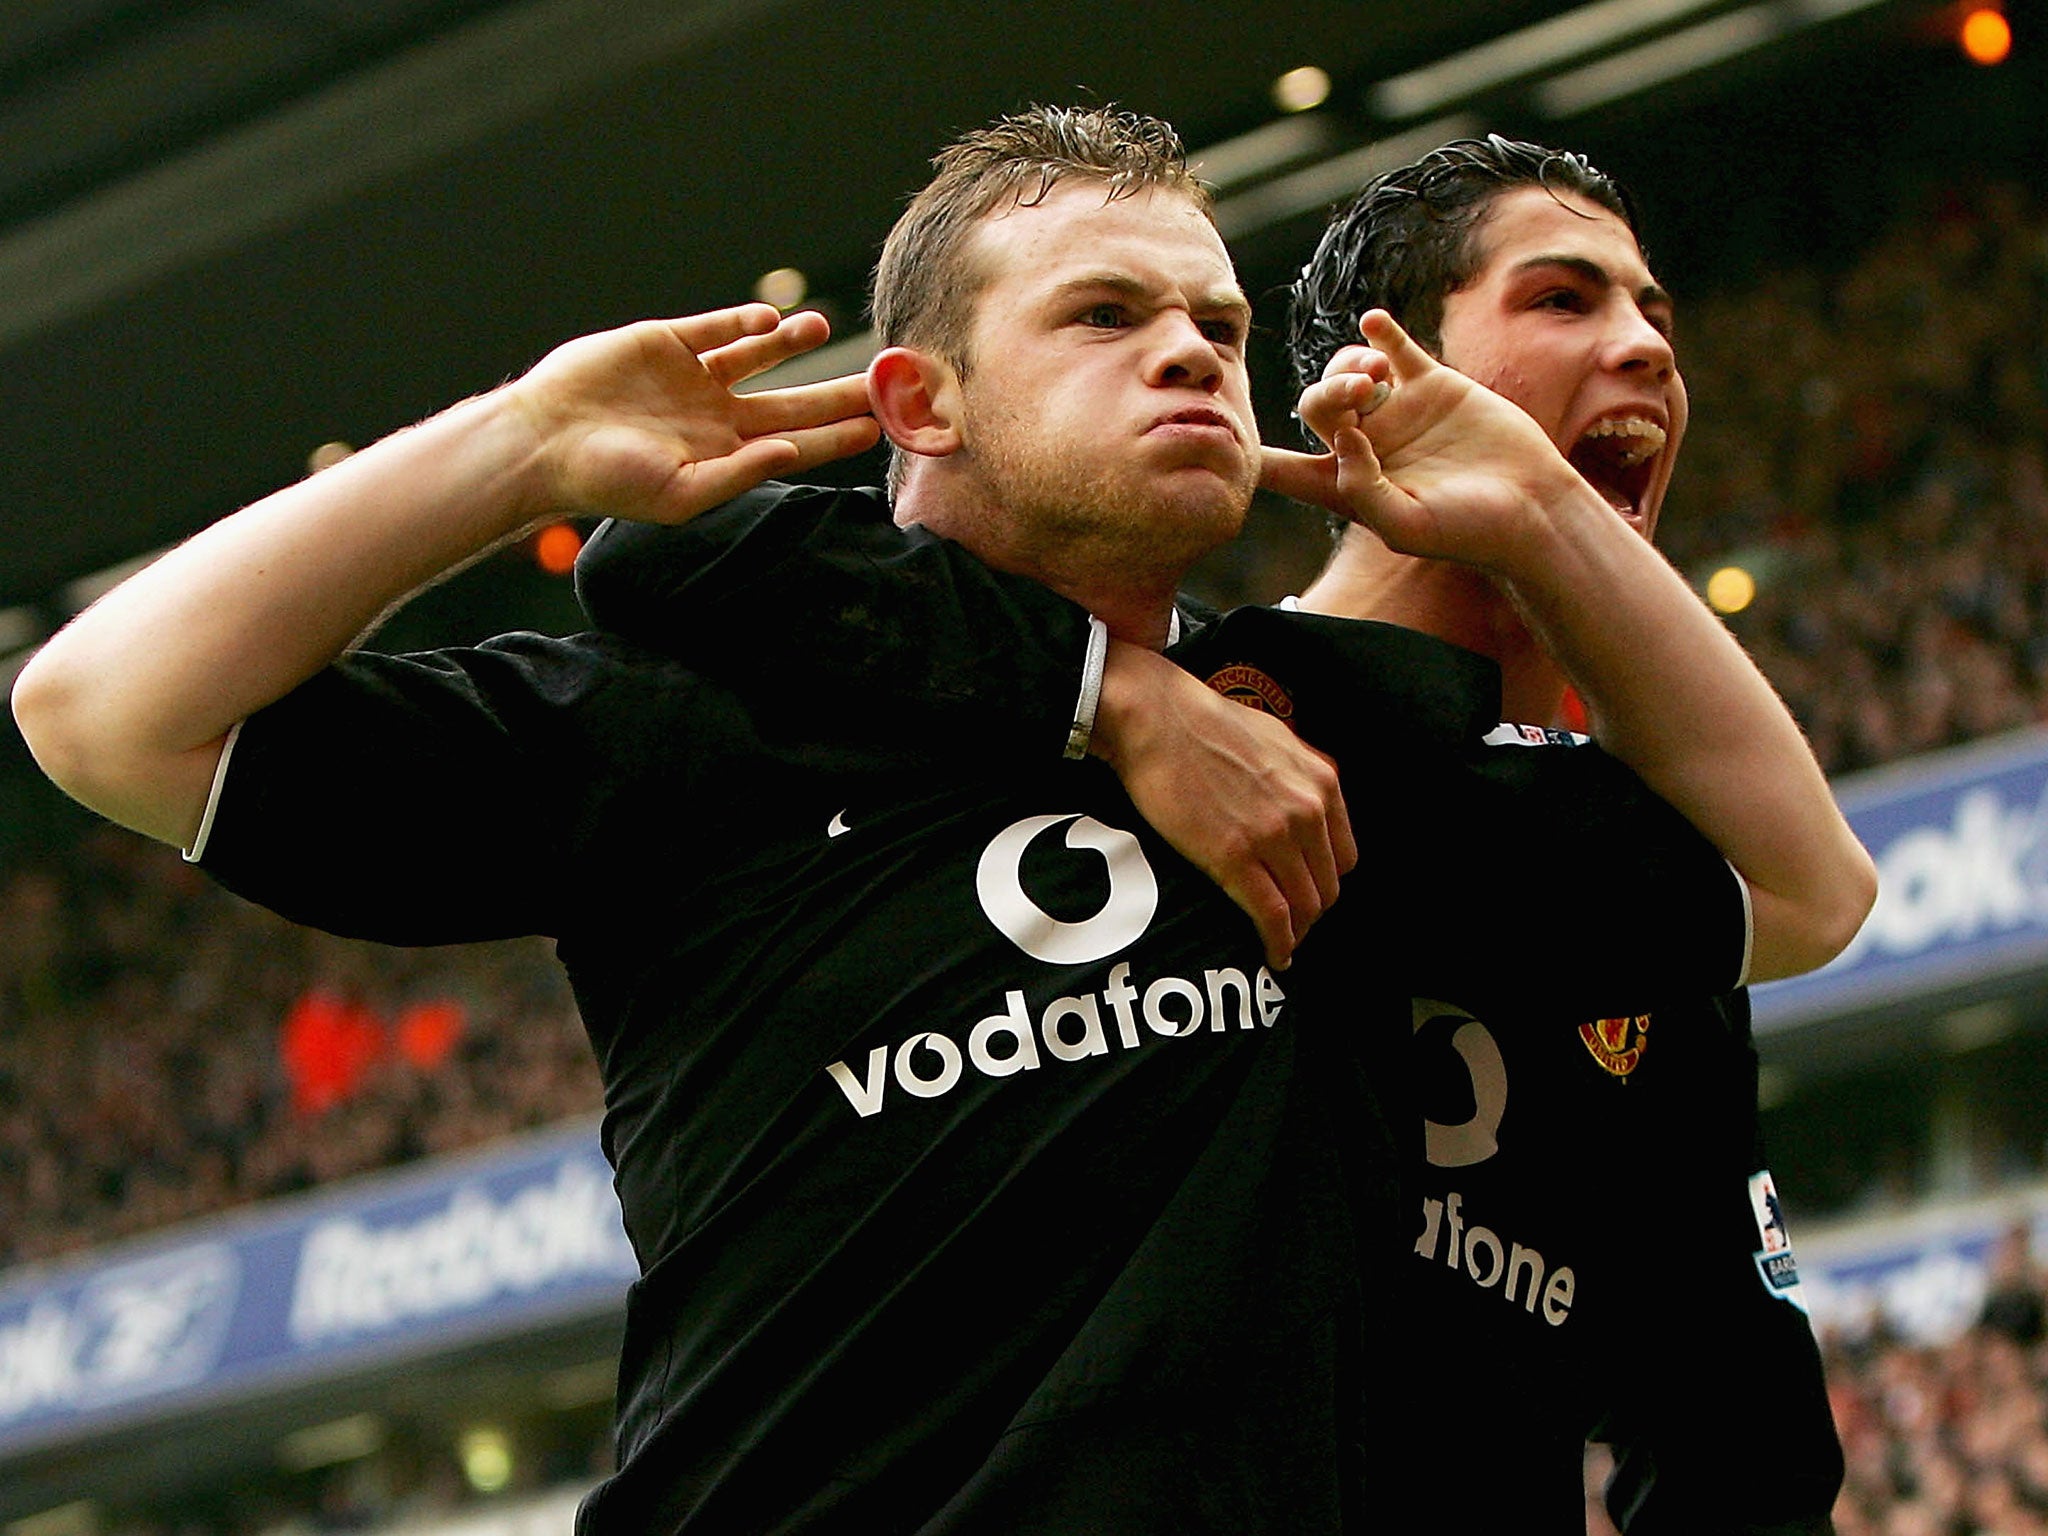 Celebrating in front of the Liverpool fans after scoring in 2005 set the tone for Wayne Rooney and Liverpool's rivalry